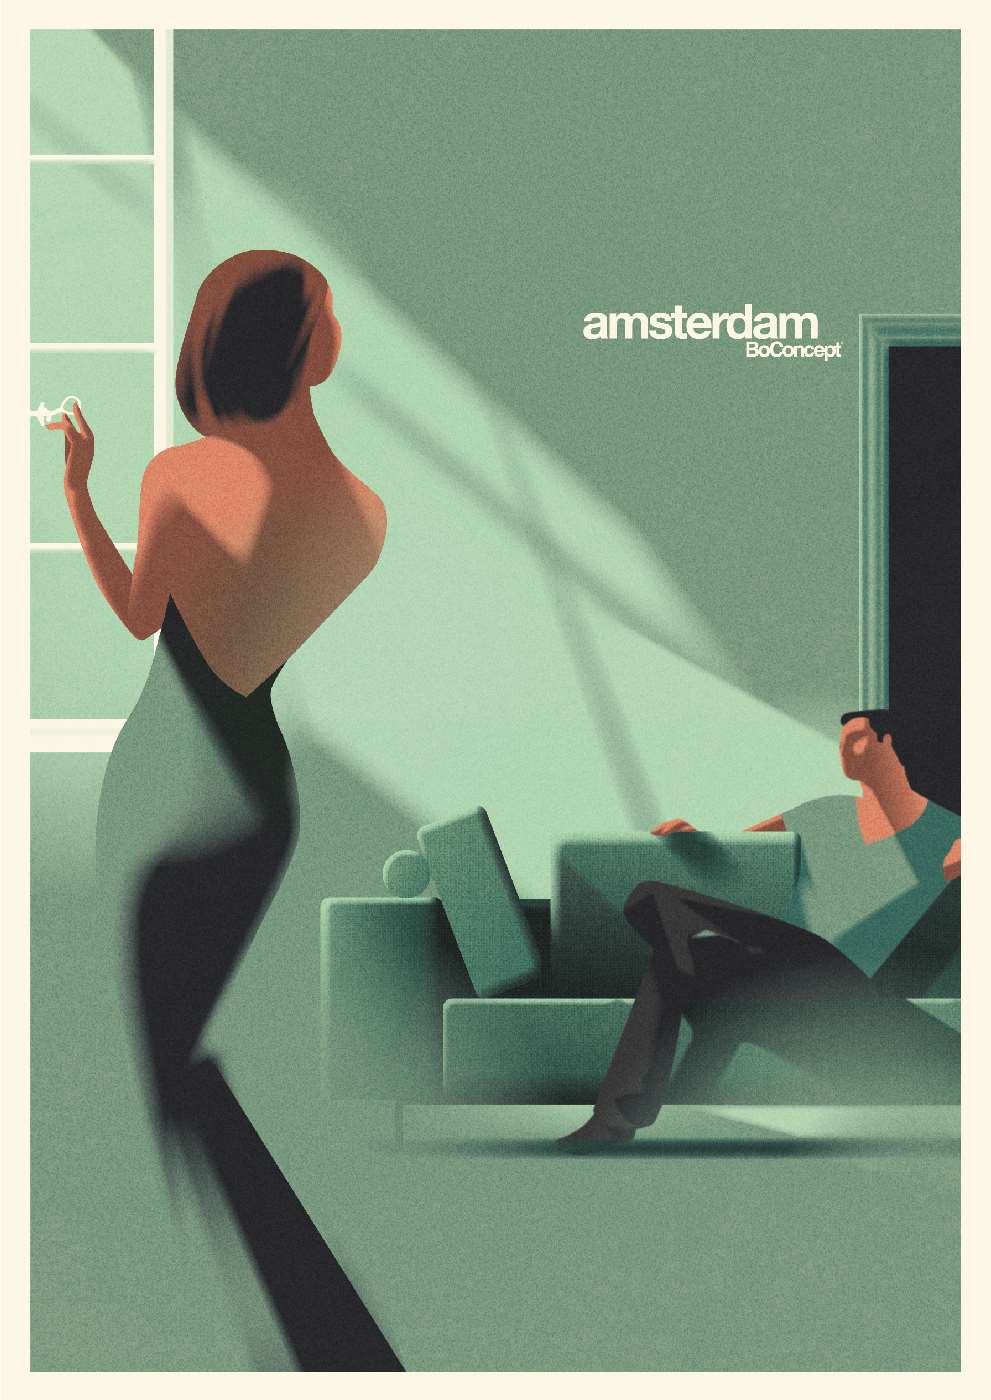 Mads Berg, Retro poster illustration for Co Concept, Amsterdam. Women posing in front of window with beautiful light. 